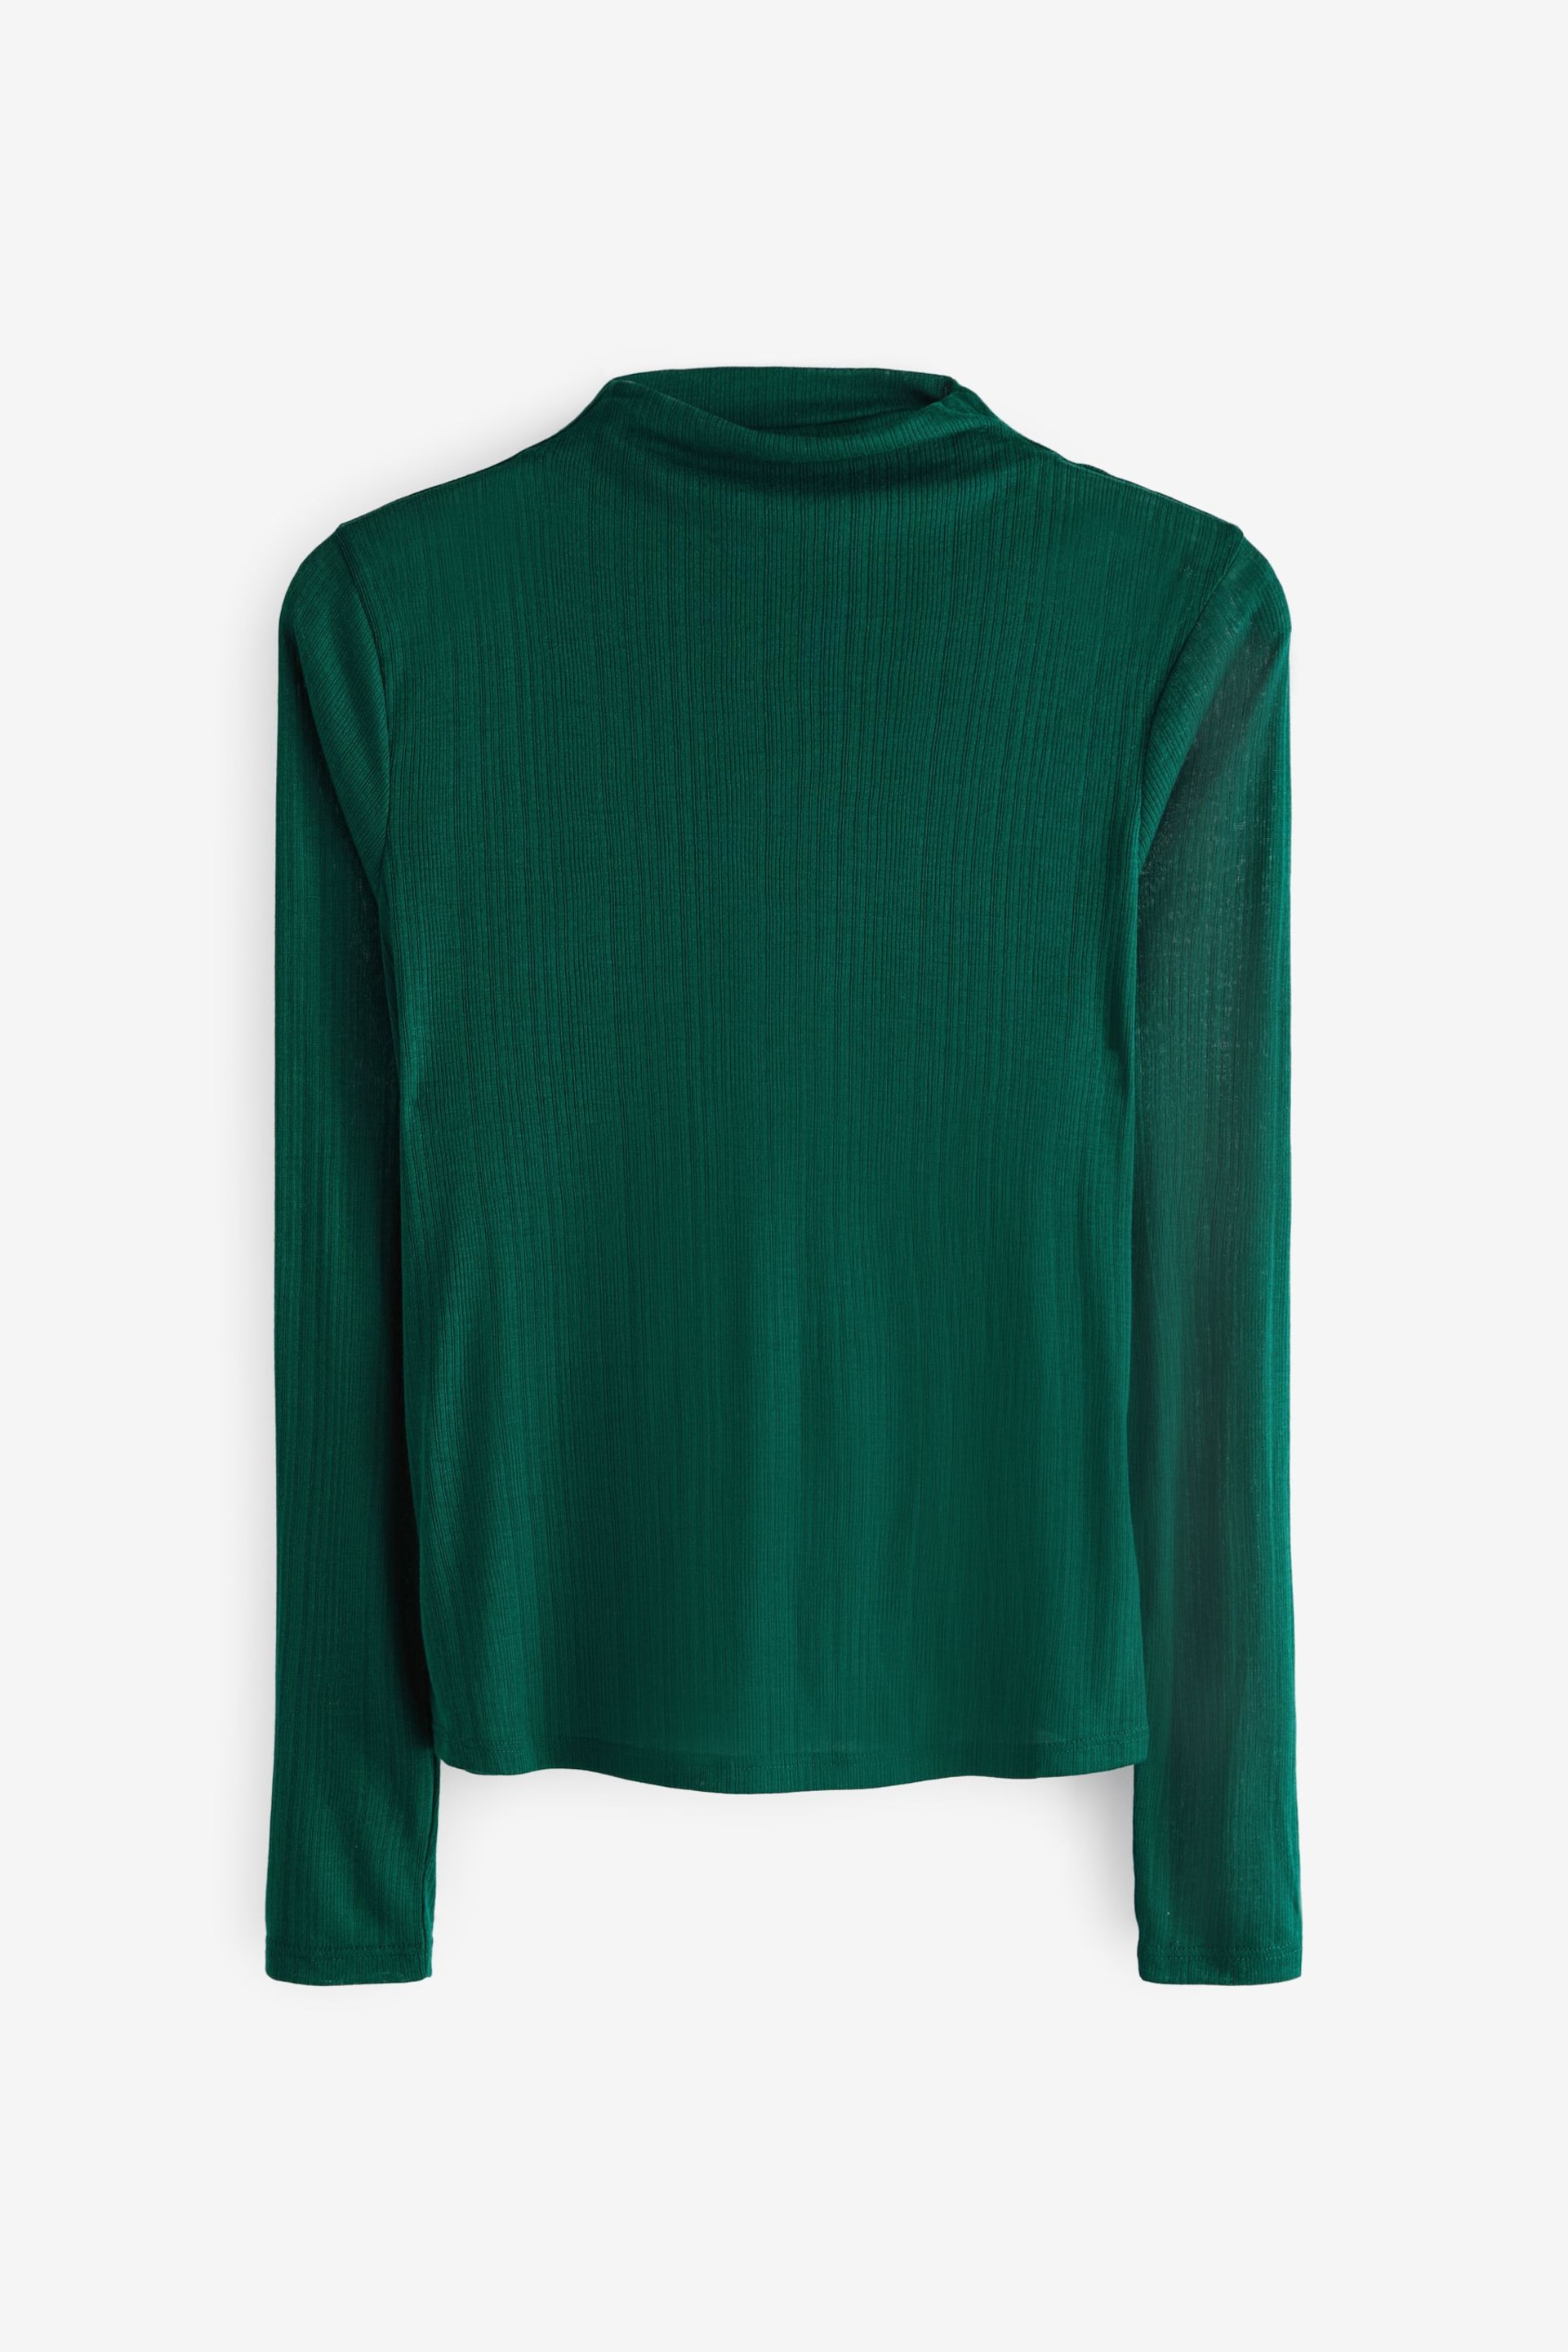 Forest Green Long Sleeve High Neck Semi-Sheer Top - Image 6 of 6